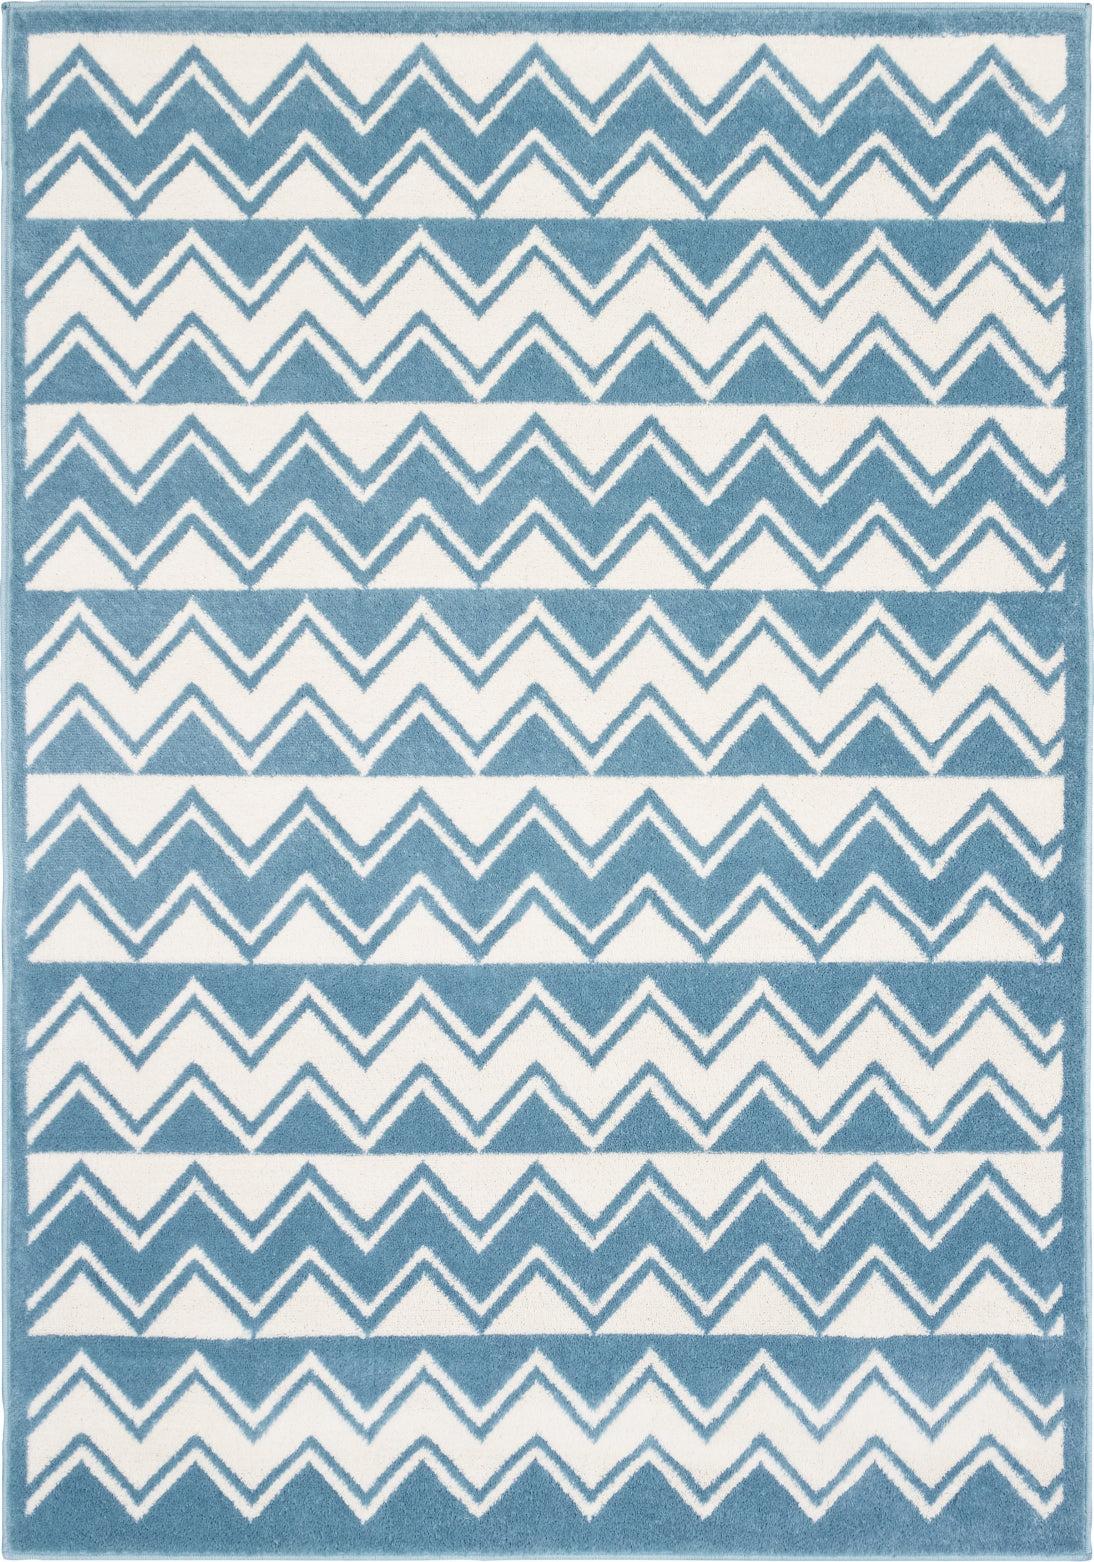 LR Resources Whimsical 81269 White/Light Blue Area Rug main image